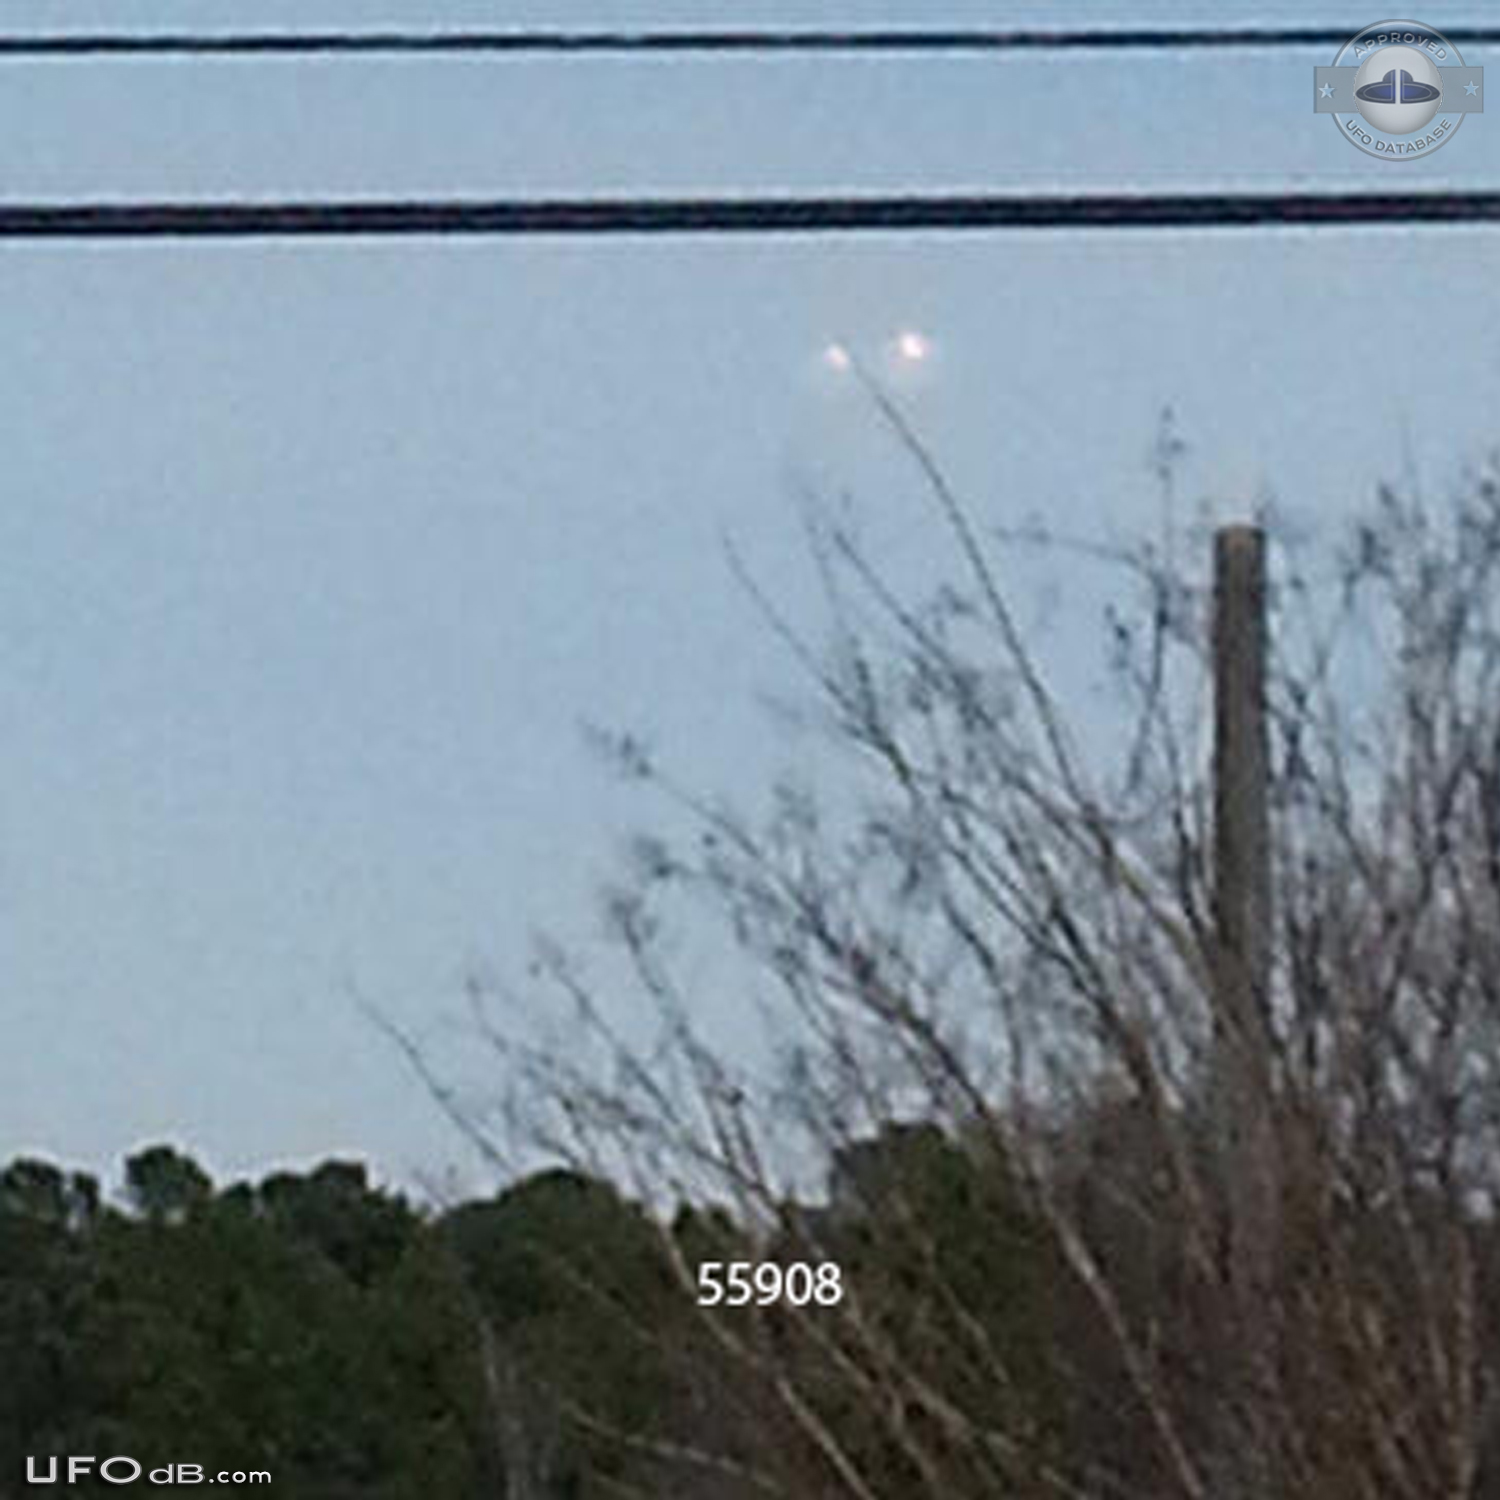 Cloud UFO over Atlanta reported to MUFON by 3 different witnesses 2014 UFO Picture #571-1